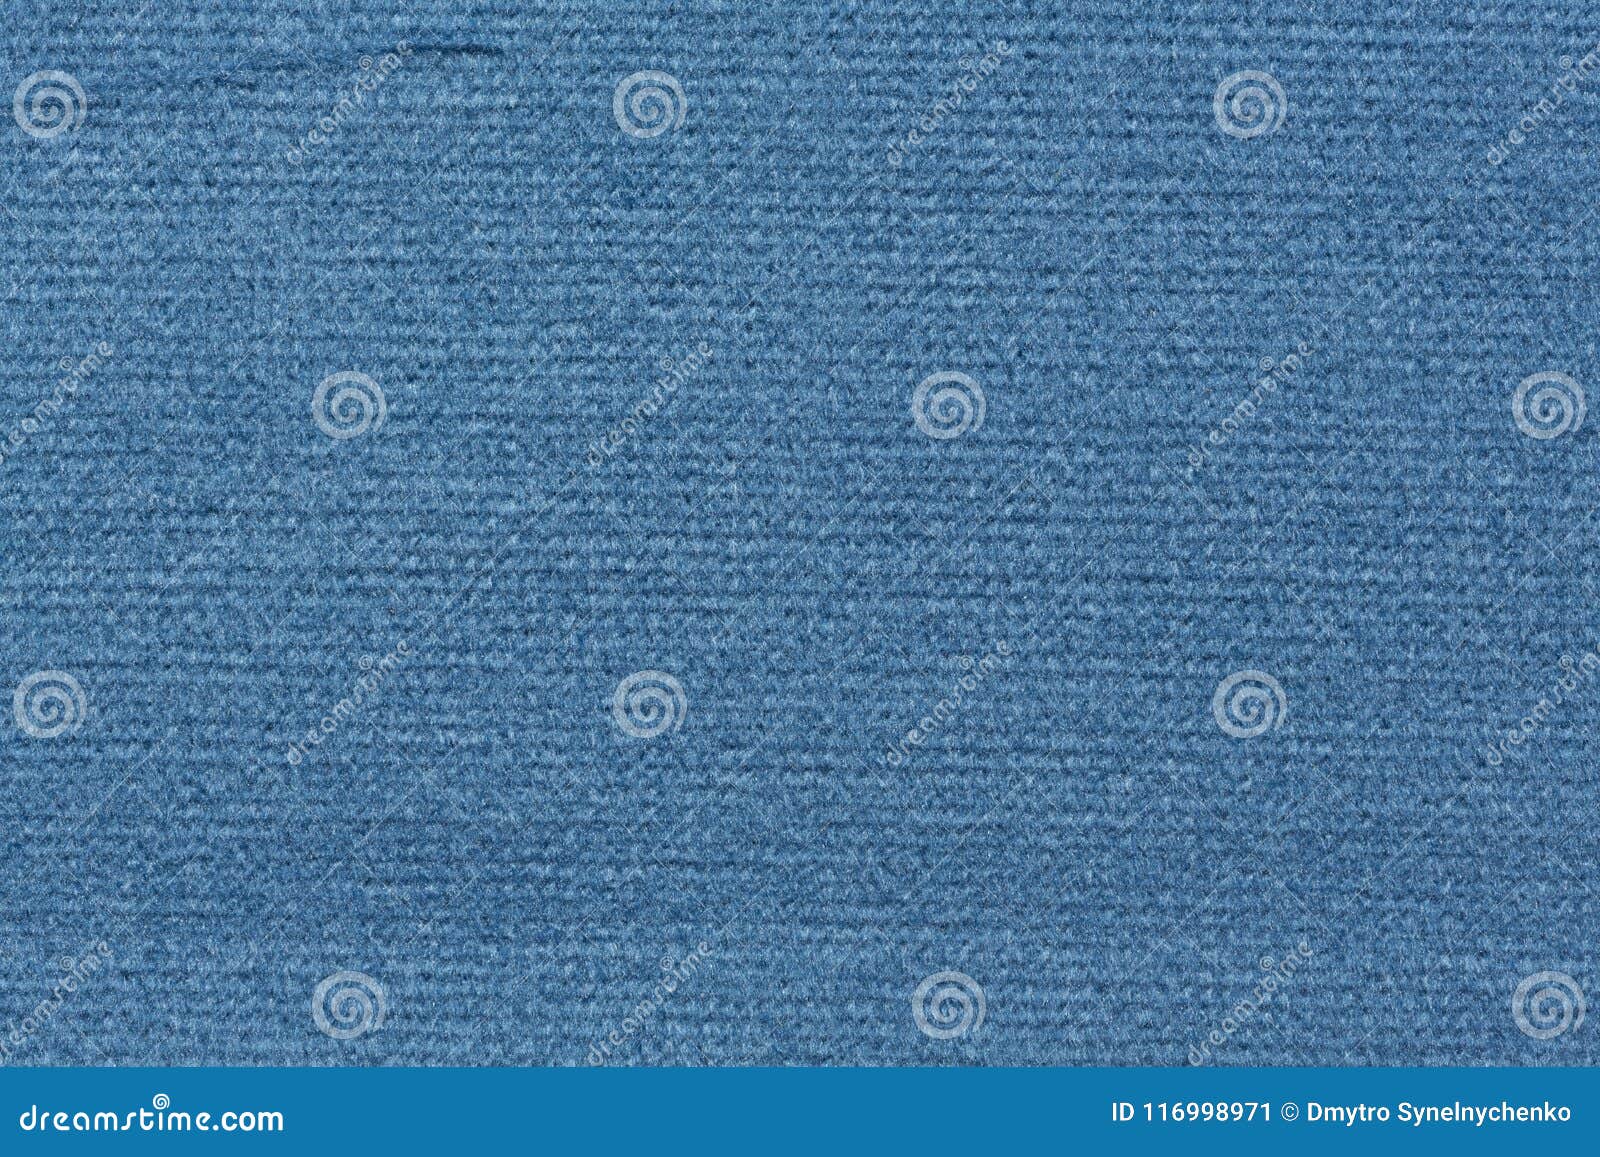 Impressively Contrast Blue Fabric Texture. Stock Image - Image of ideal ...